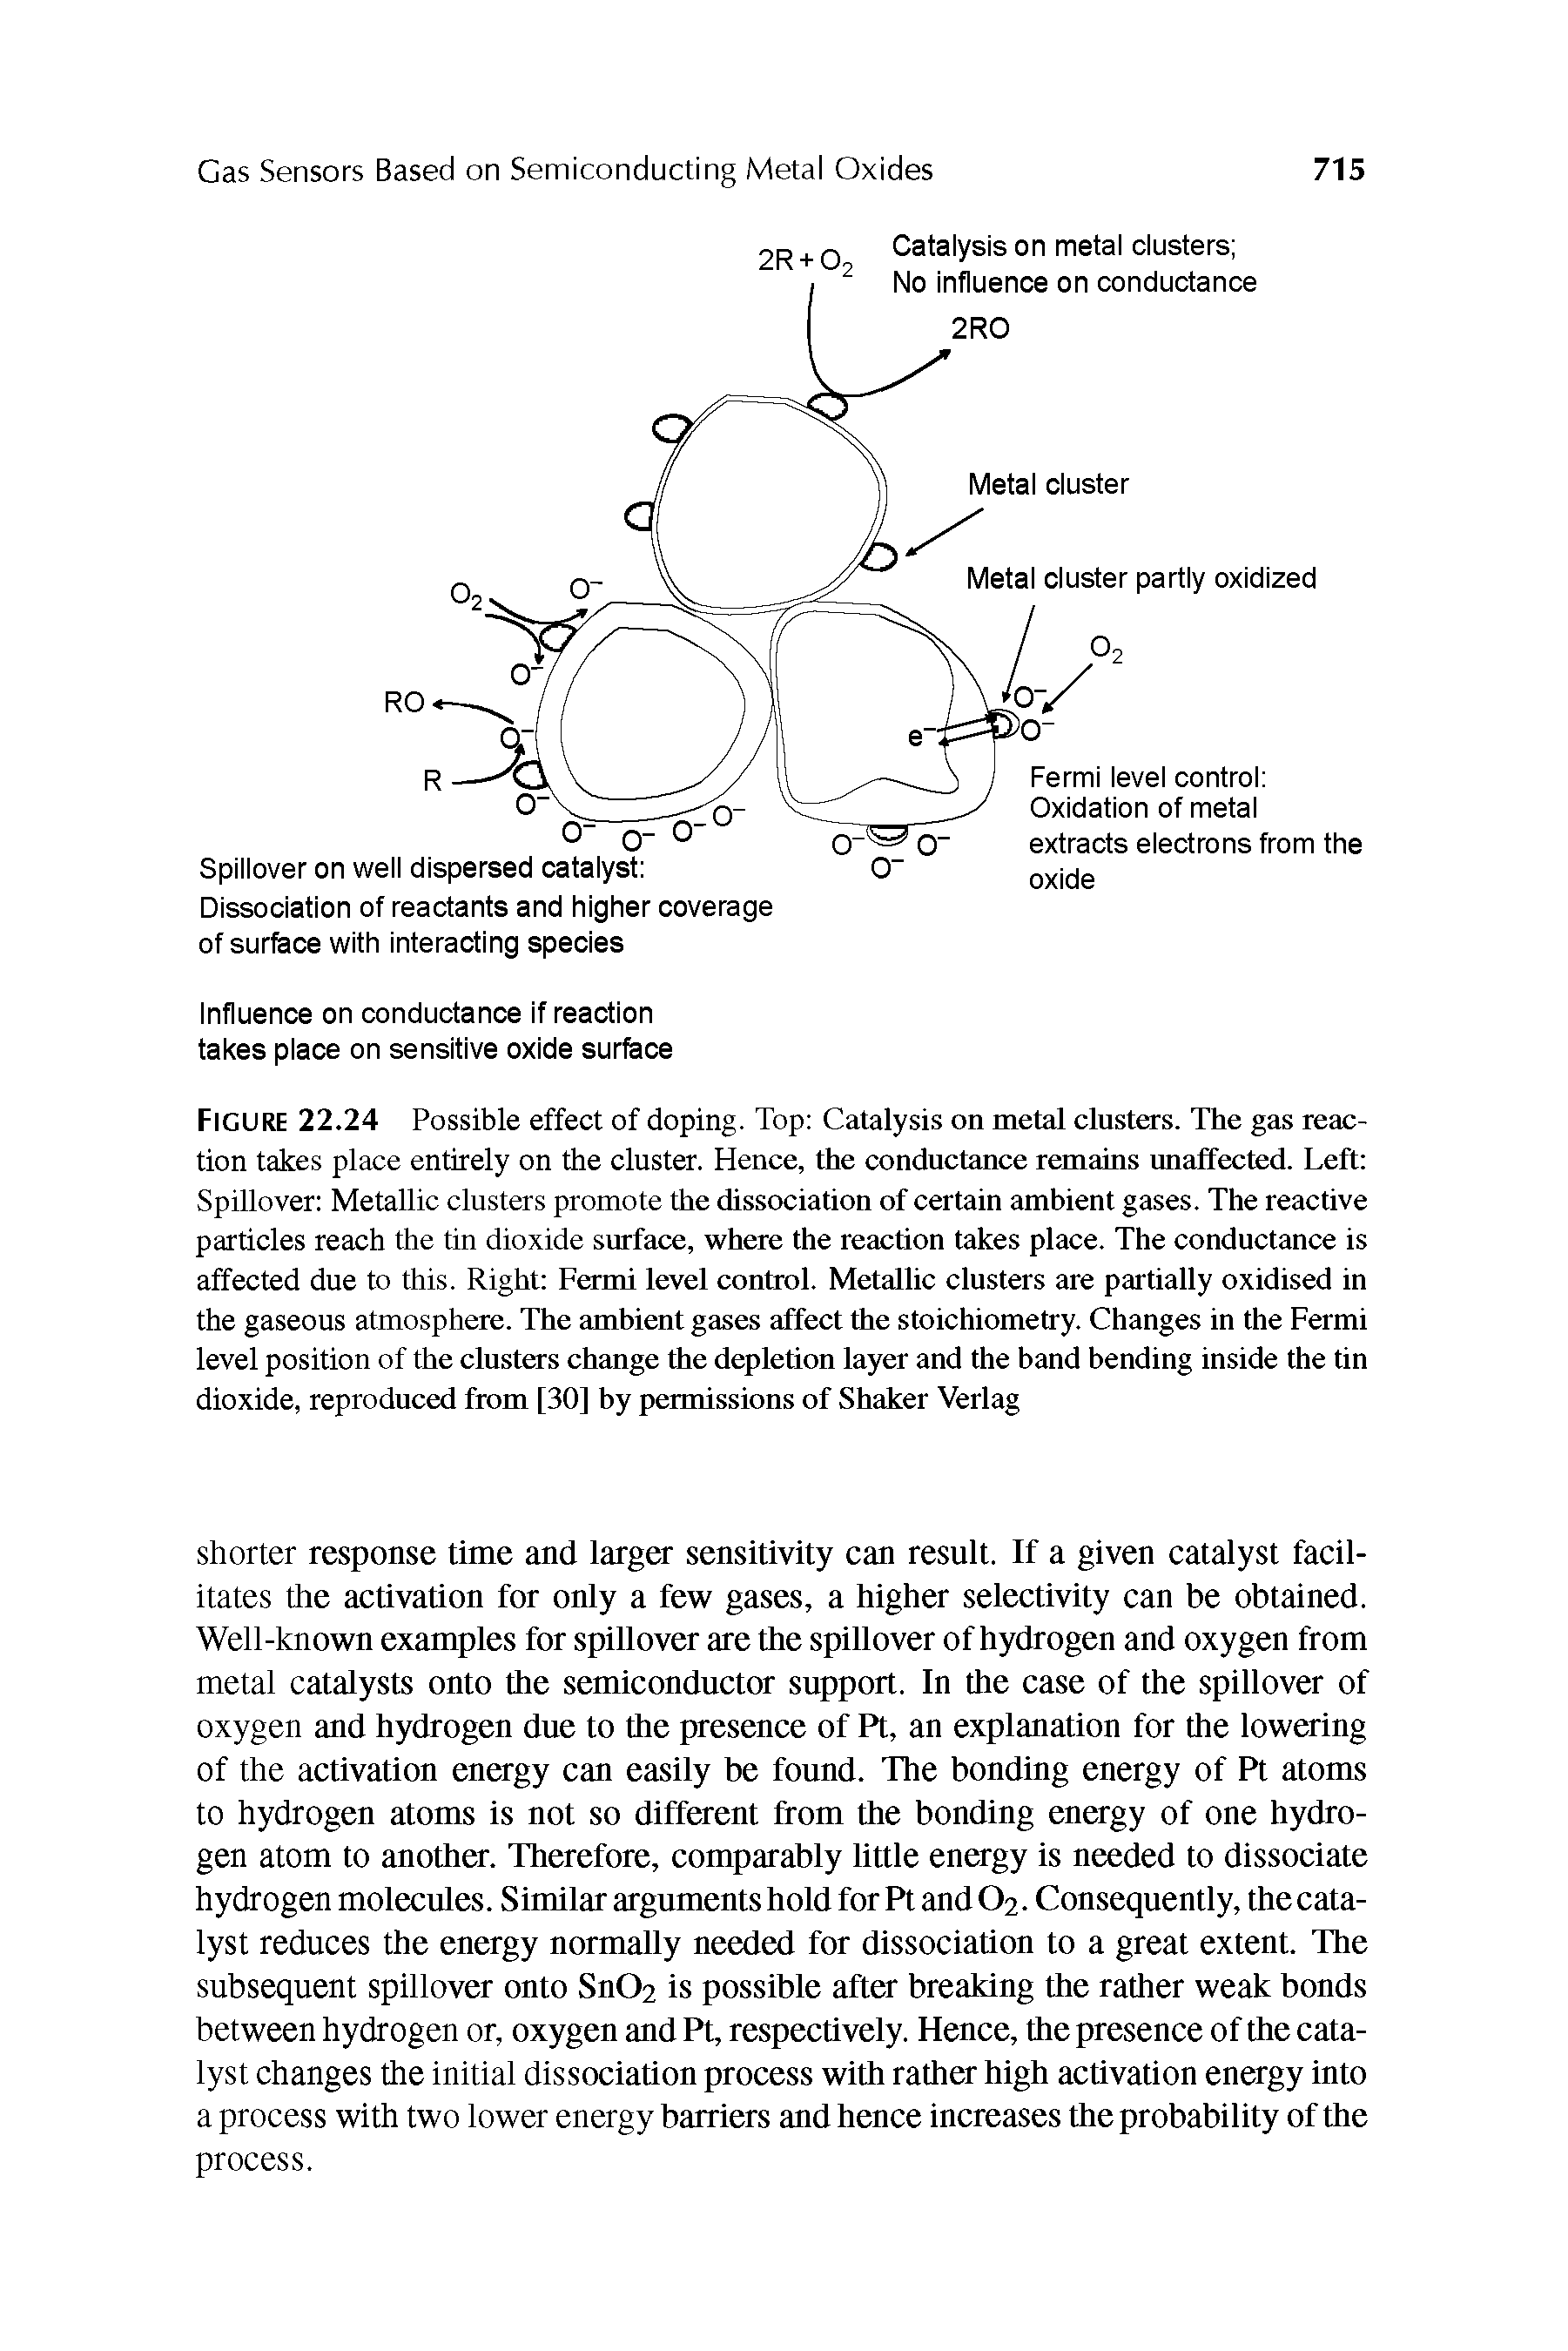 Figure 22.24 Possible effect of doping. Top Catalysis on metal clusters. The gas reaction takes place entirely on the cluster. Hence, the conductance remains unaffected. Left Spillover Metallic clusters promote the dissociation of certain ambient gases. The reactive particles reach the tin dioxide surface, where the reaction takes place. The conductance is affected due to this. Right Fermi level control. Metallic clusters are partially oxidised in the gaseous atmosphere. The ambient gases affect the stoichiometry. Changes in the Fermi level position of the clusters change the depletion layer and the band bending inside the tin dioxide, reproduced from [30] by permissions of Shaker Verlag...